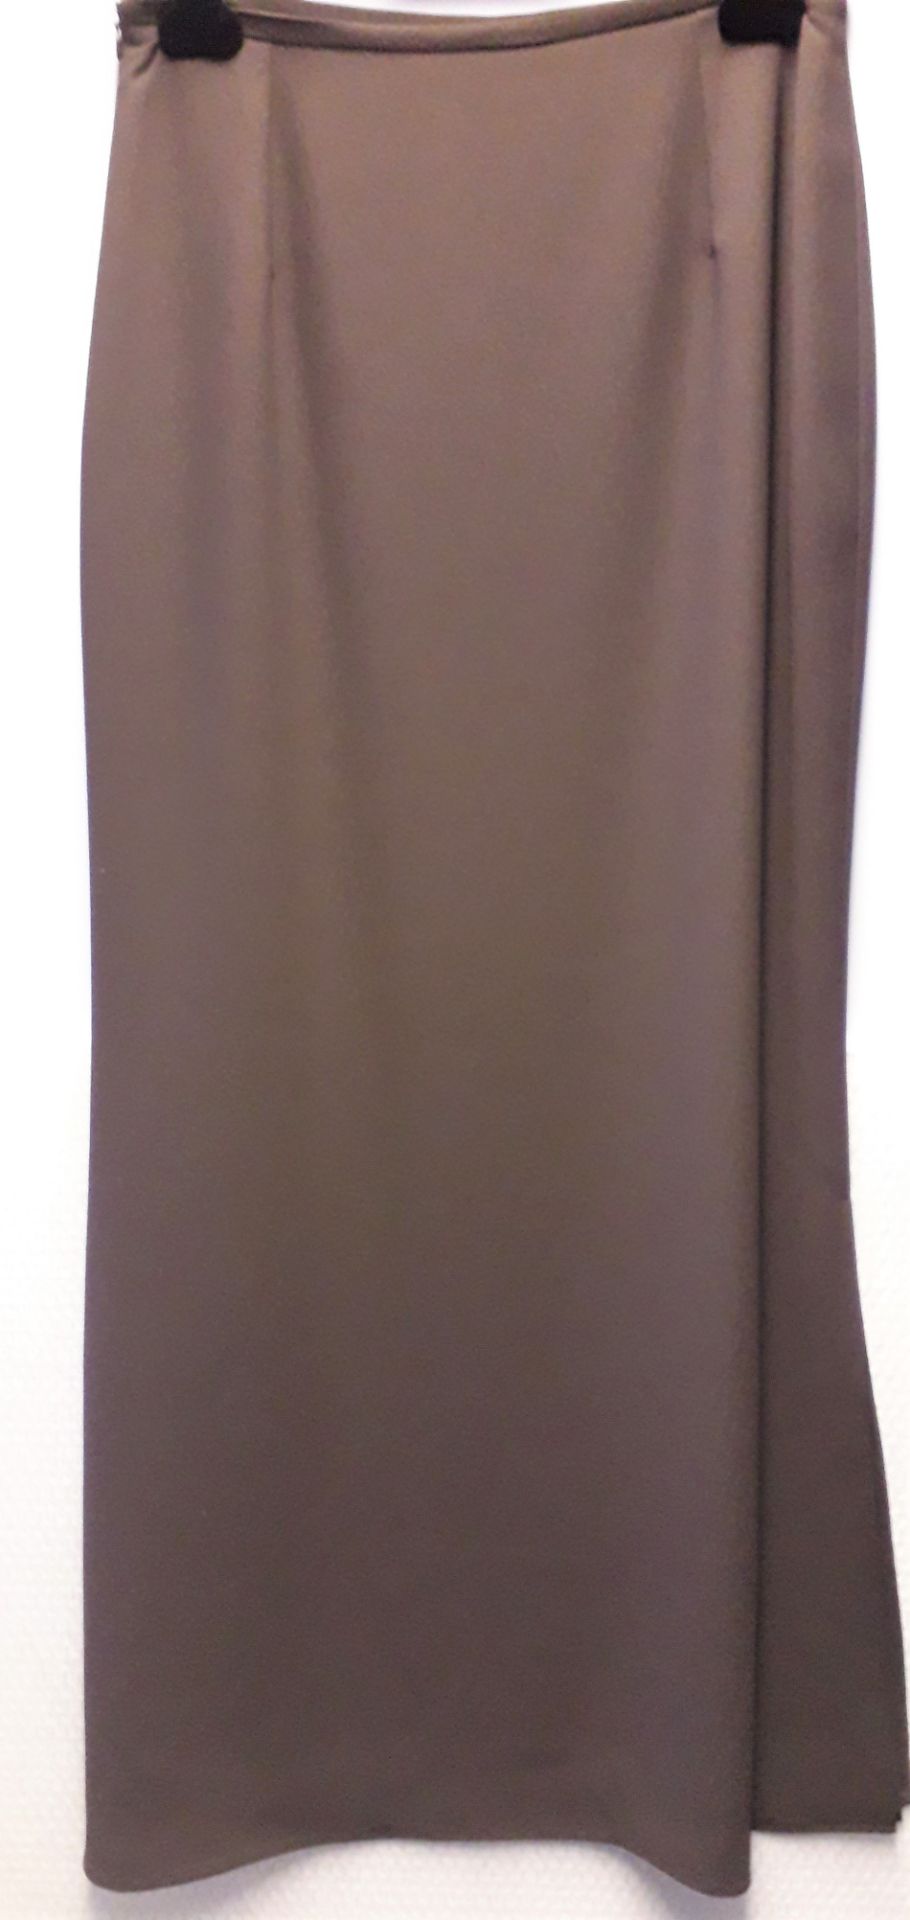 1 x Anne Belin Rich Brown Longer Length Skirt - Size: 16 - Material: 100% Polyester - From a High - Image 3 of 7